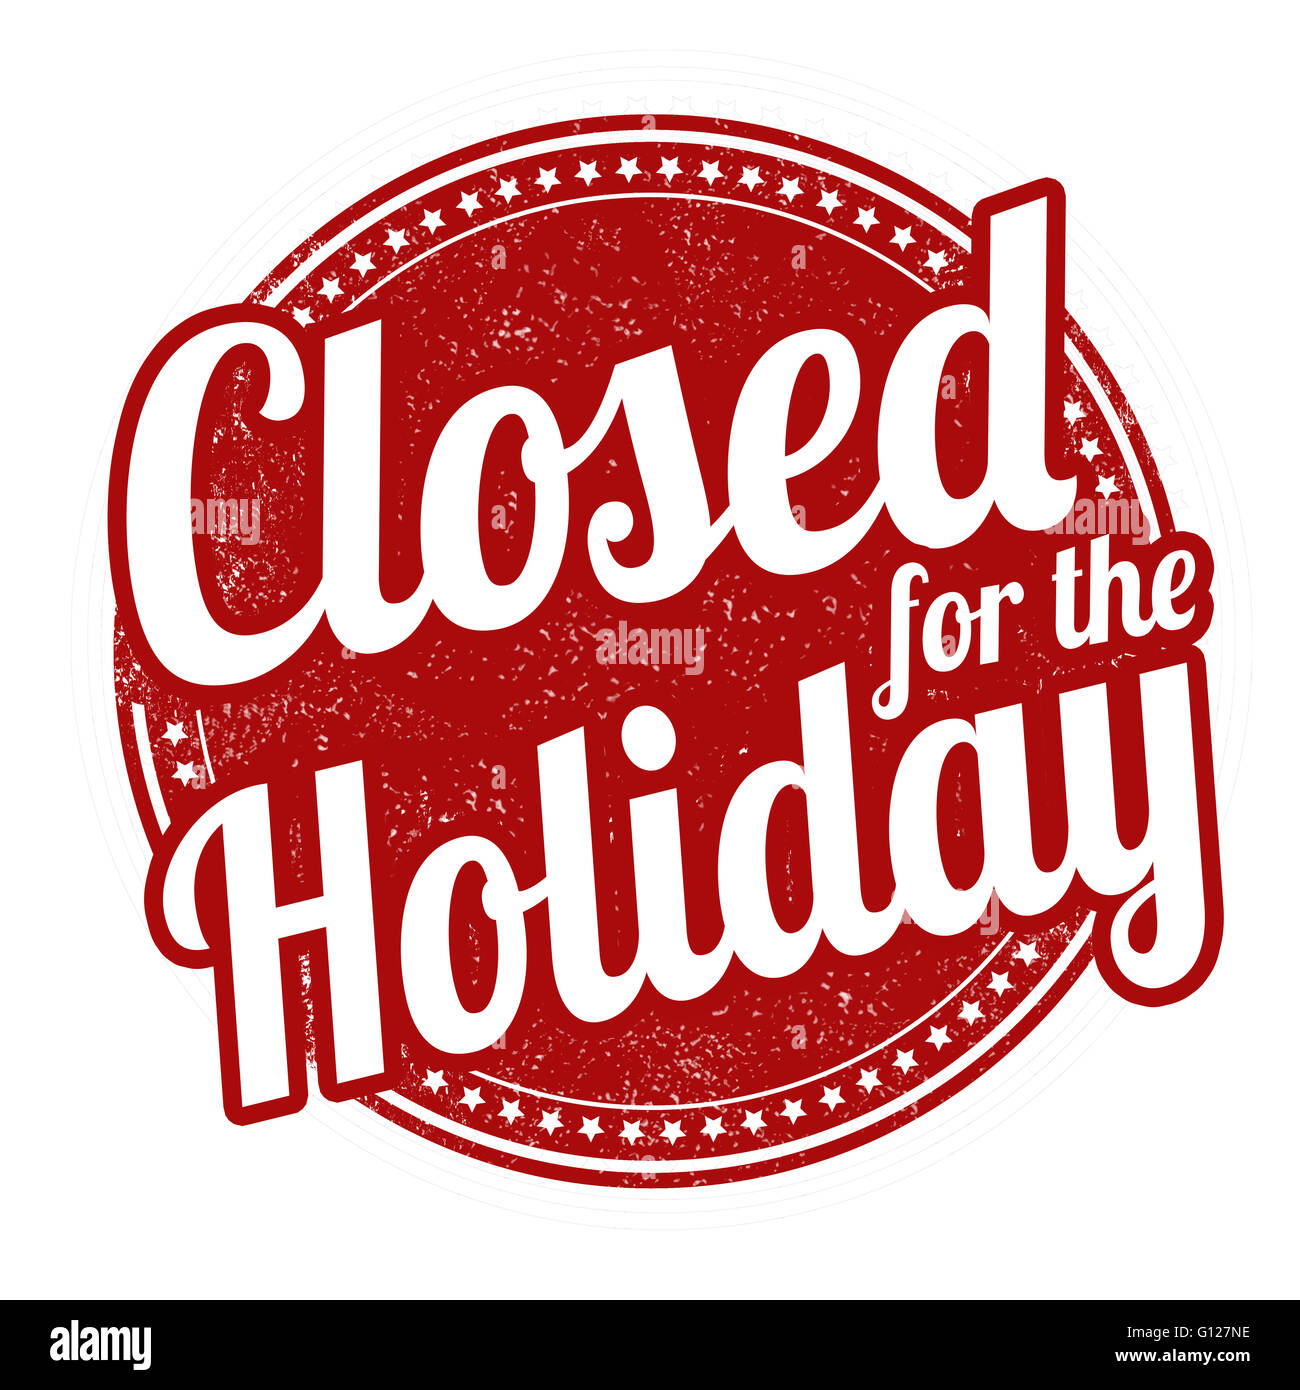 Closed for the holiday grunge rubber stamp on white background, vector illustration Stock Photo